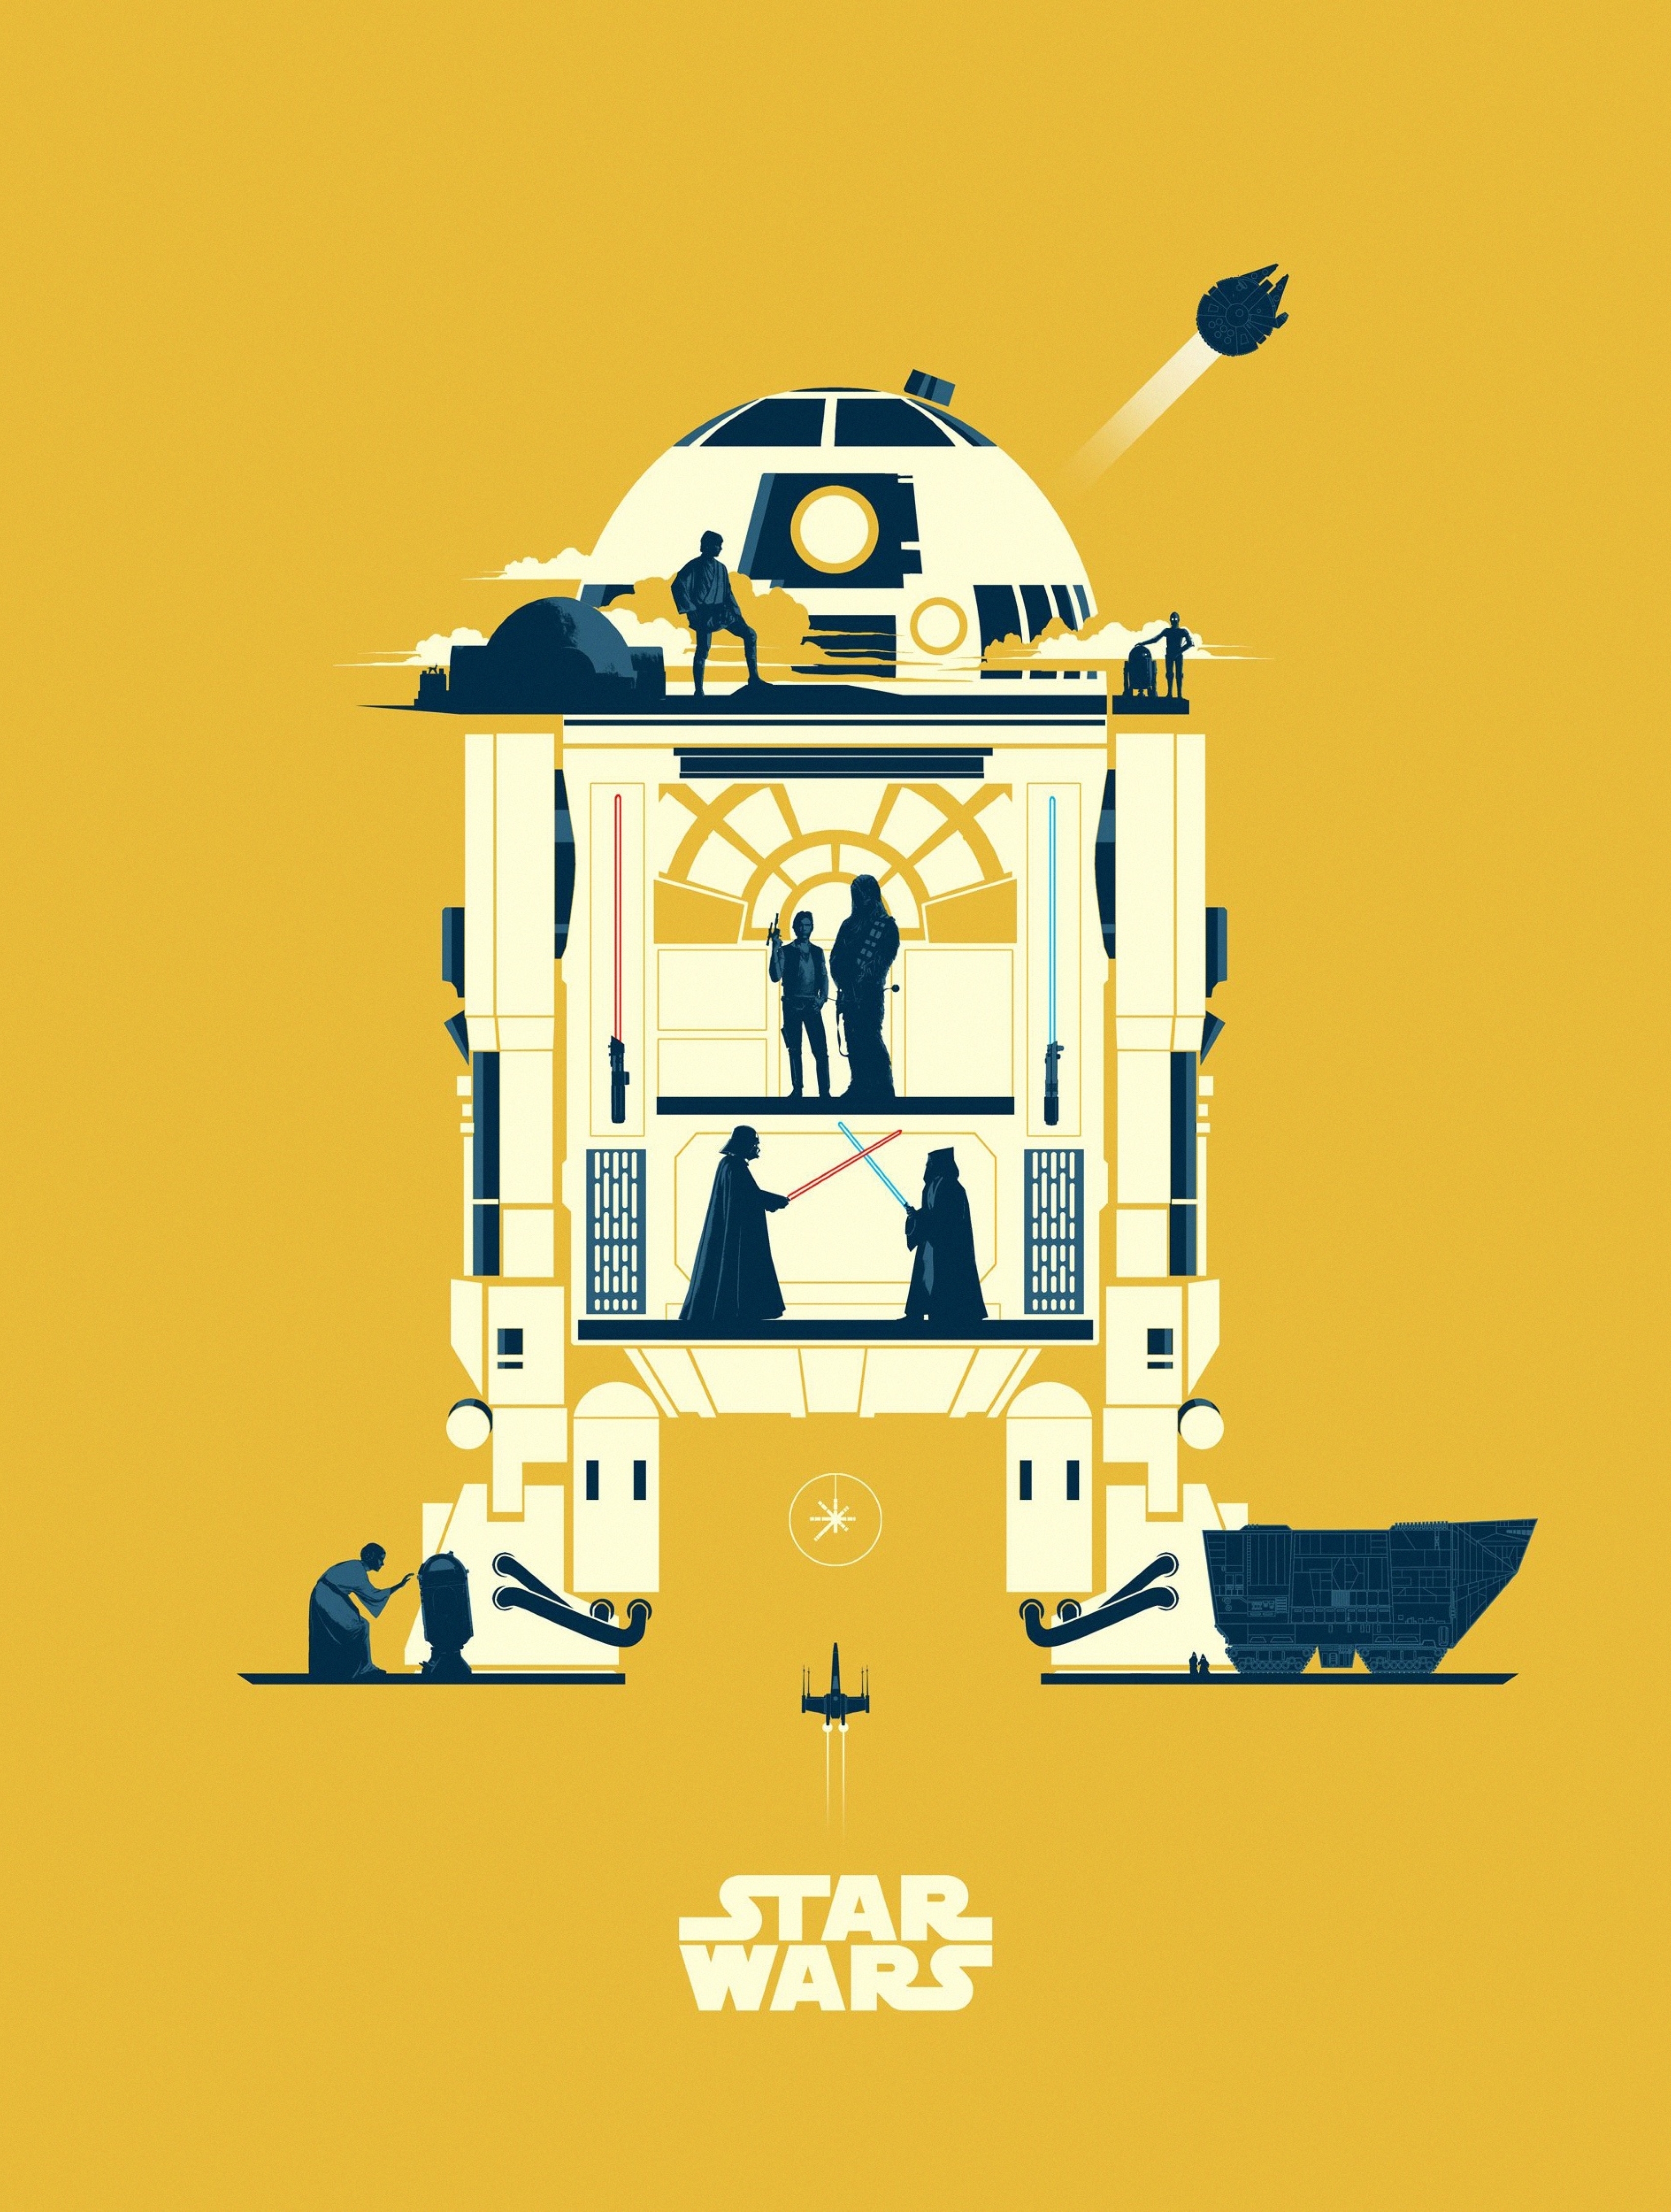 3400x4500 R2 D2 Star Wars Minimalist 3400x4500 Resolution Wallpaper Hd Minimalist 4k Wallpapers Images Photos And Background Wallpapers Den